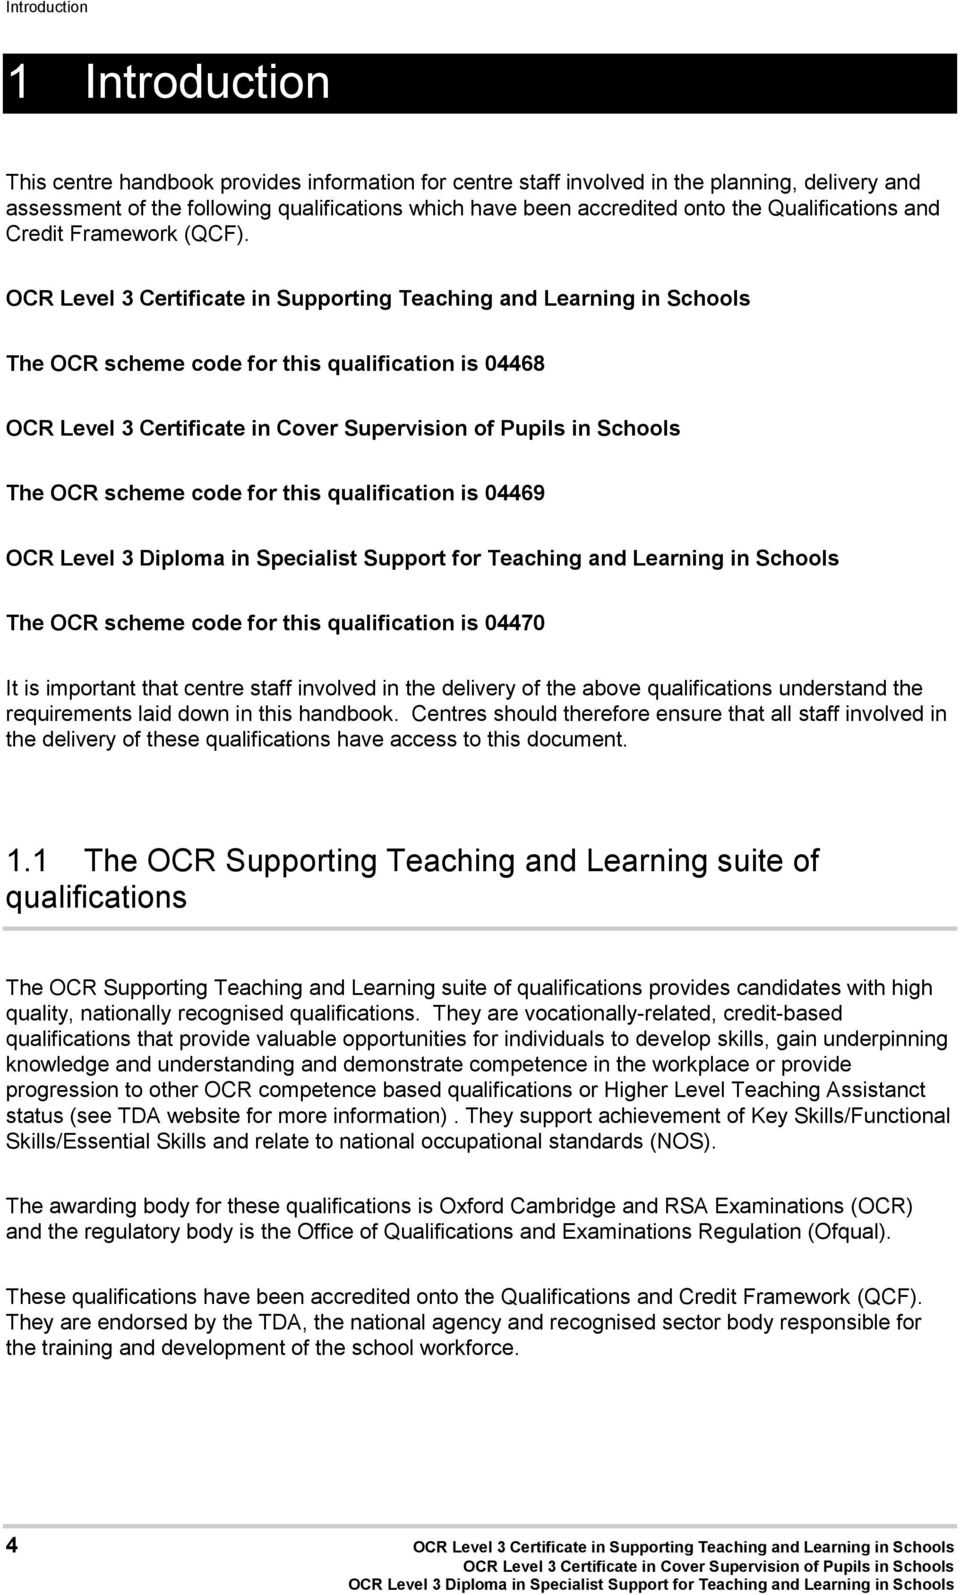 OCR Level 3 Certificate in Supporting Teaching and Learning in Schools The OCR scheme code for this qualification is 04468 The OCR scheme code for this qualification is 04469 The OCR scheme code for